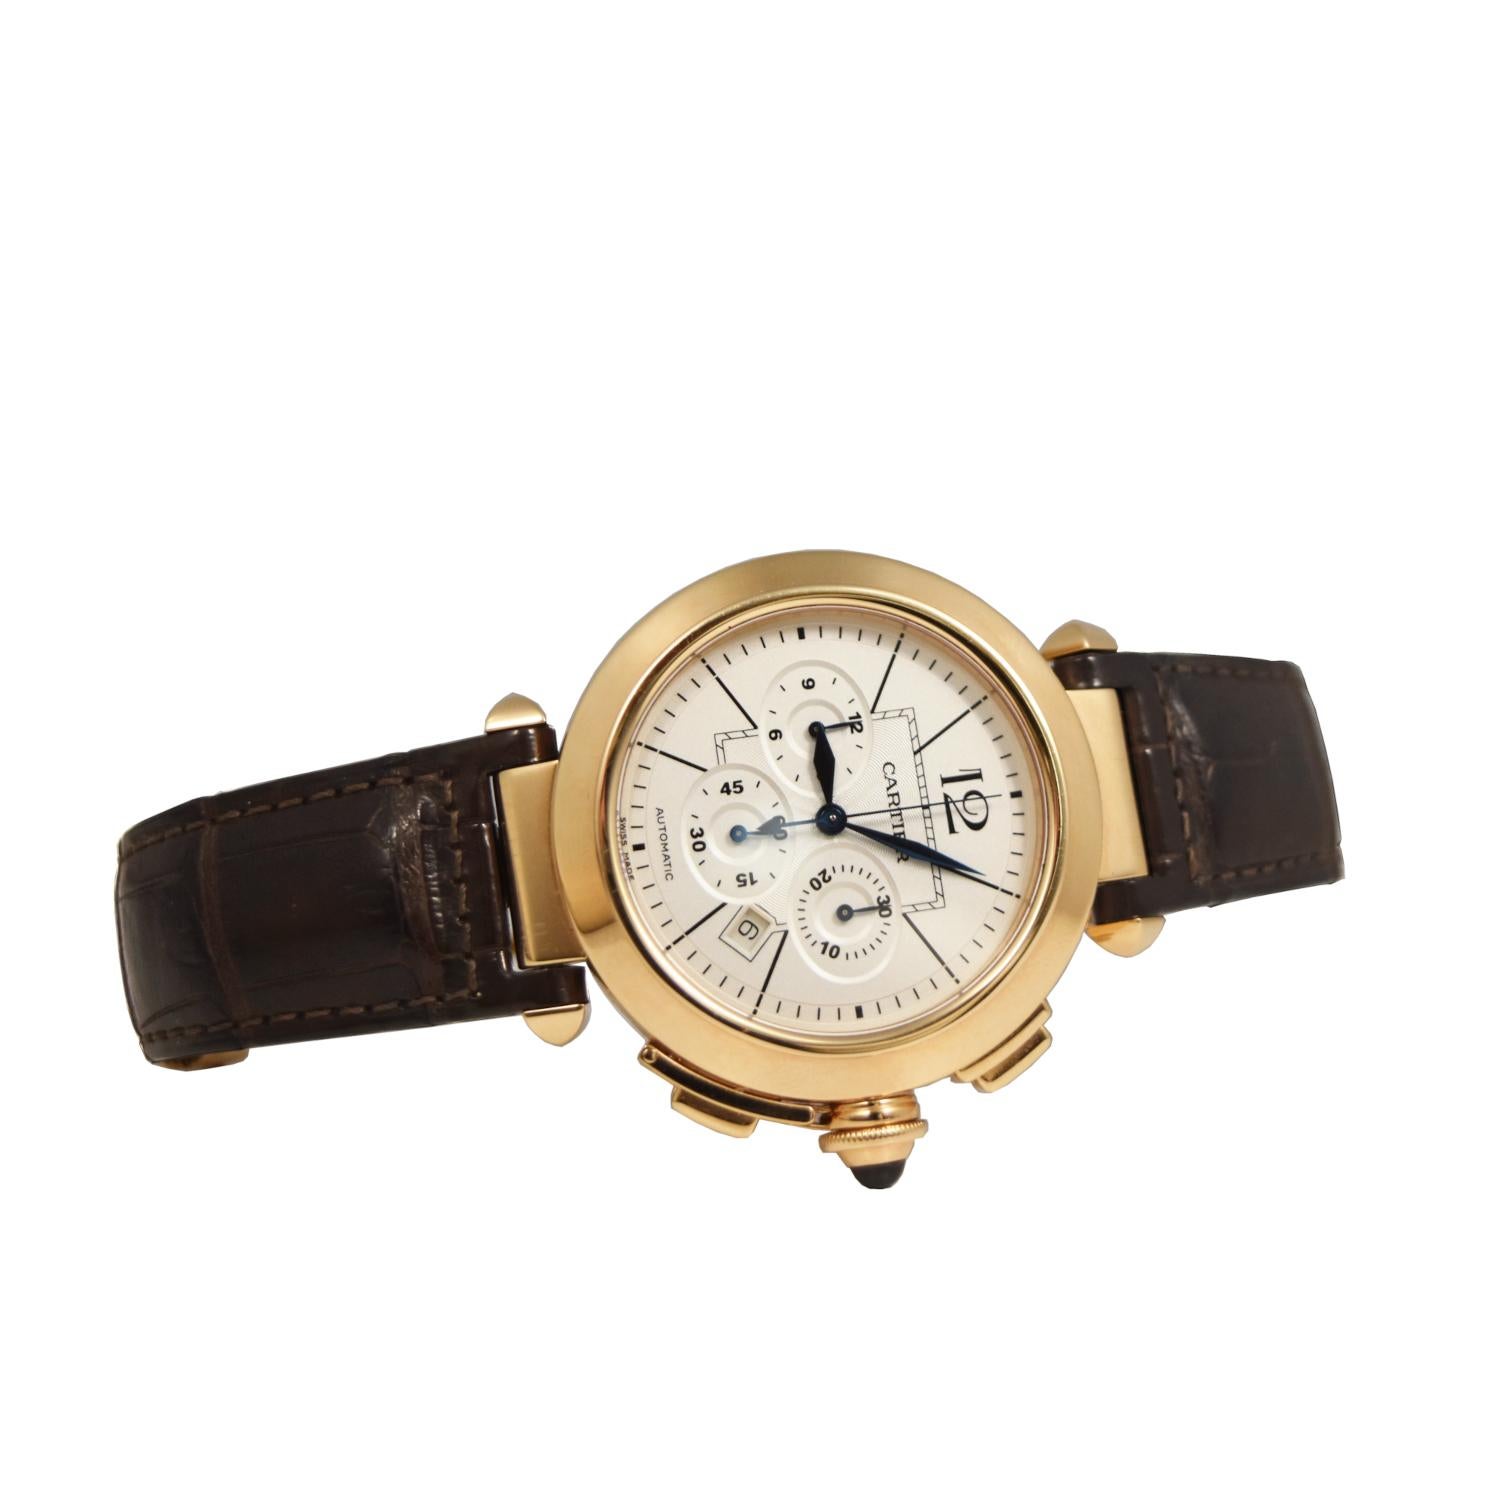 Inspired by one of its wristwatch from 1943, Cartier created the Pasha series which turned out to be the perfect combination of power and elegance, with its round case, four Arabic numerals and sword-shaped hands. This model features a 41mm 18k Rose